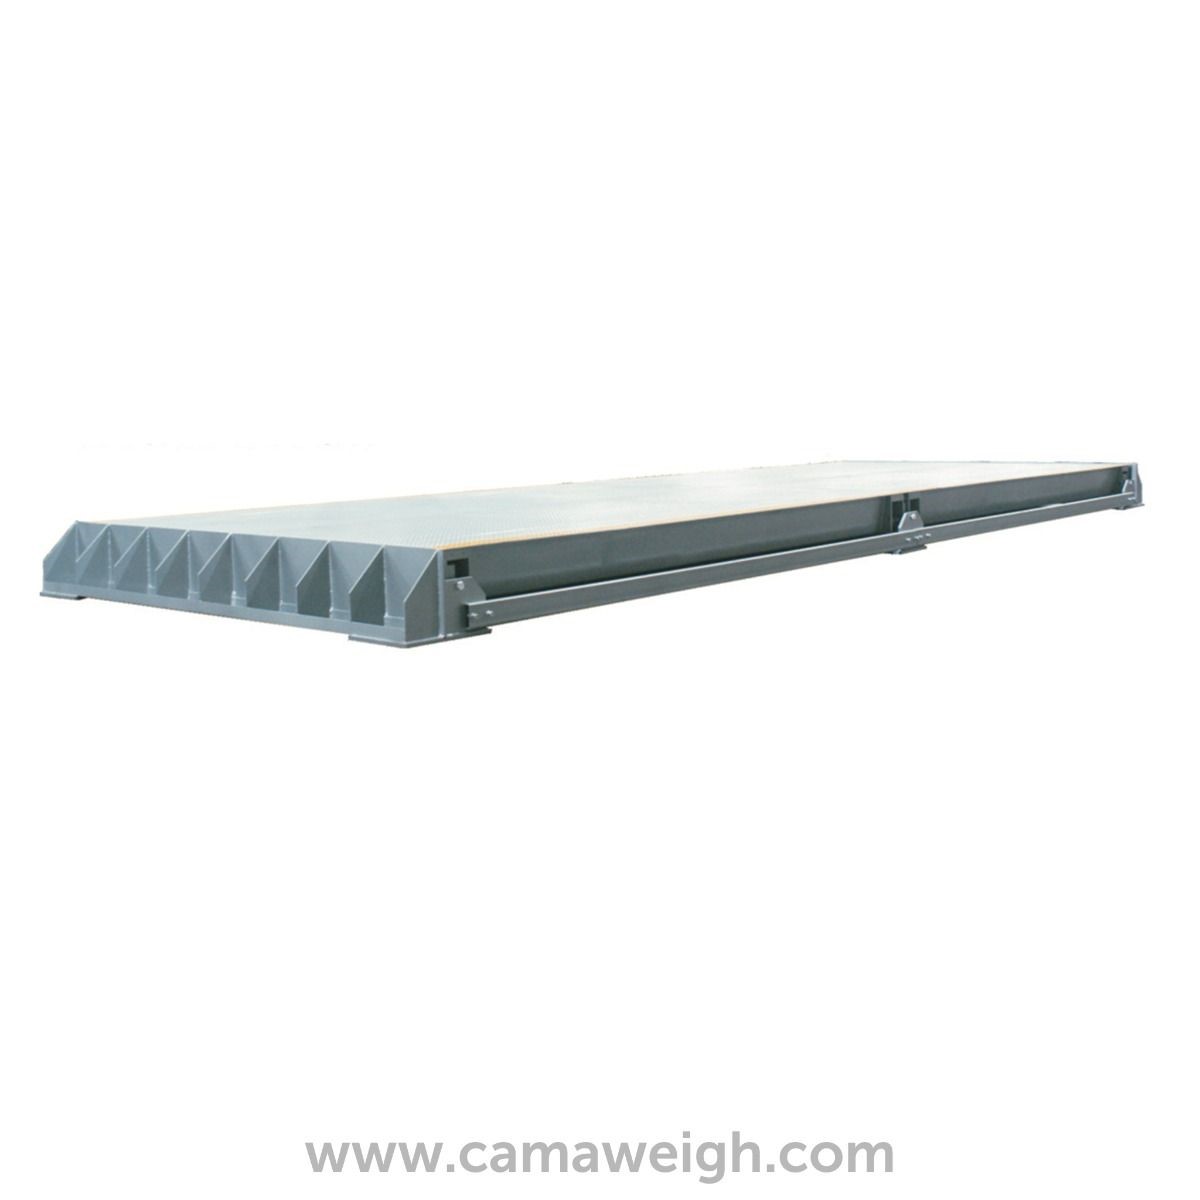 Movable/Portable Truck Scale without ramps and indicator listed as product at Camaweigh